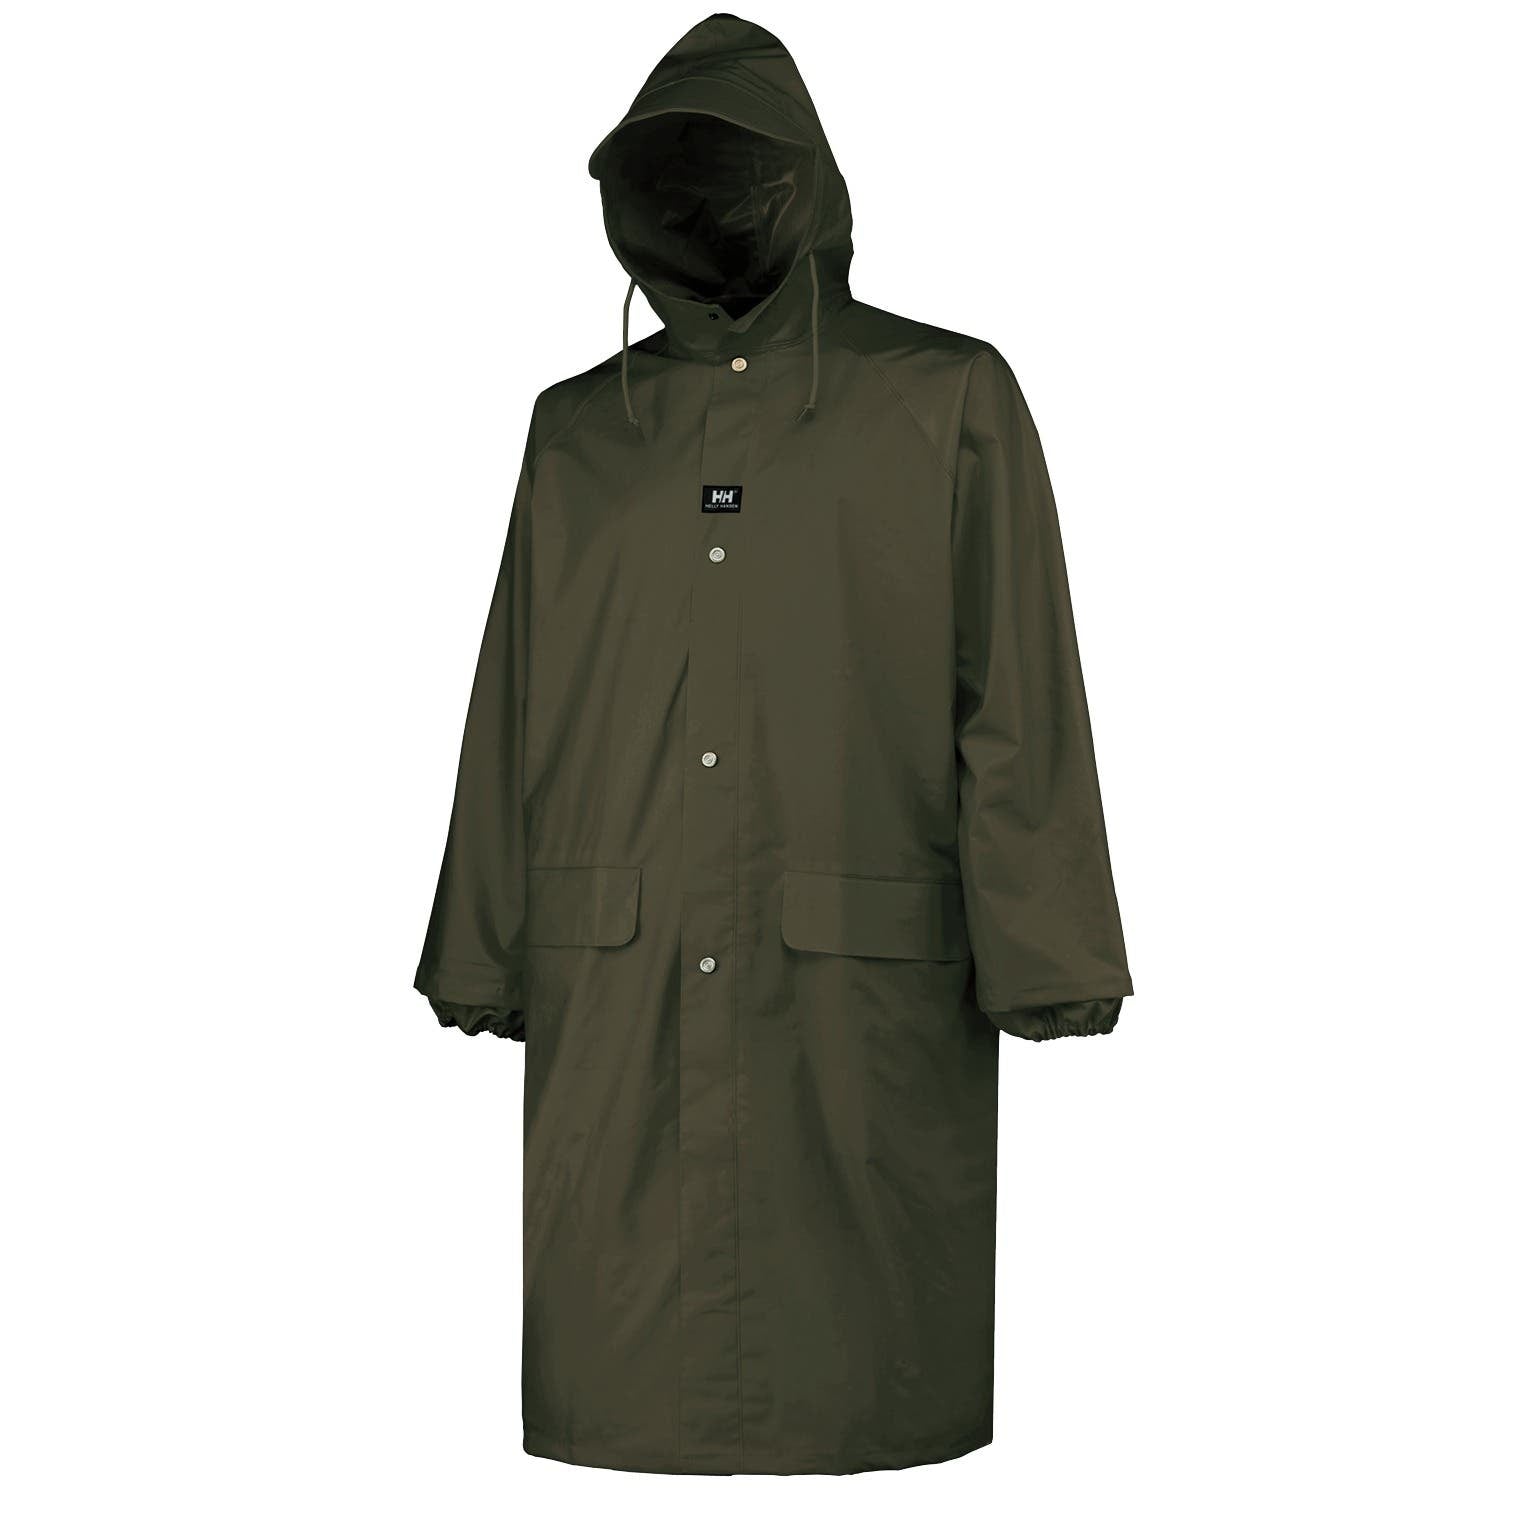 Helly Hansen Men's Woodland Rainwear Coat in Army Green from the front